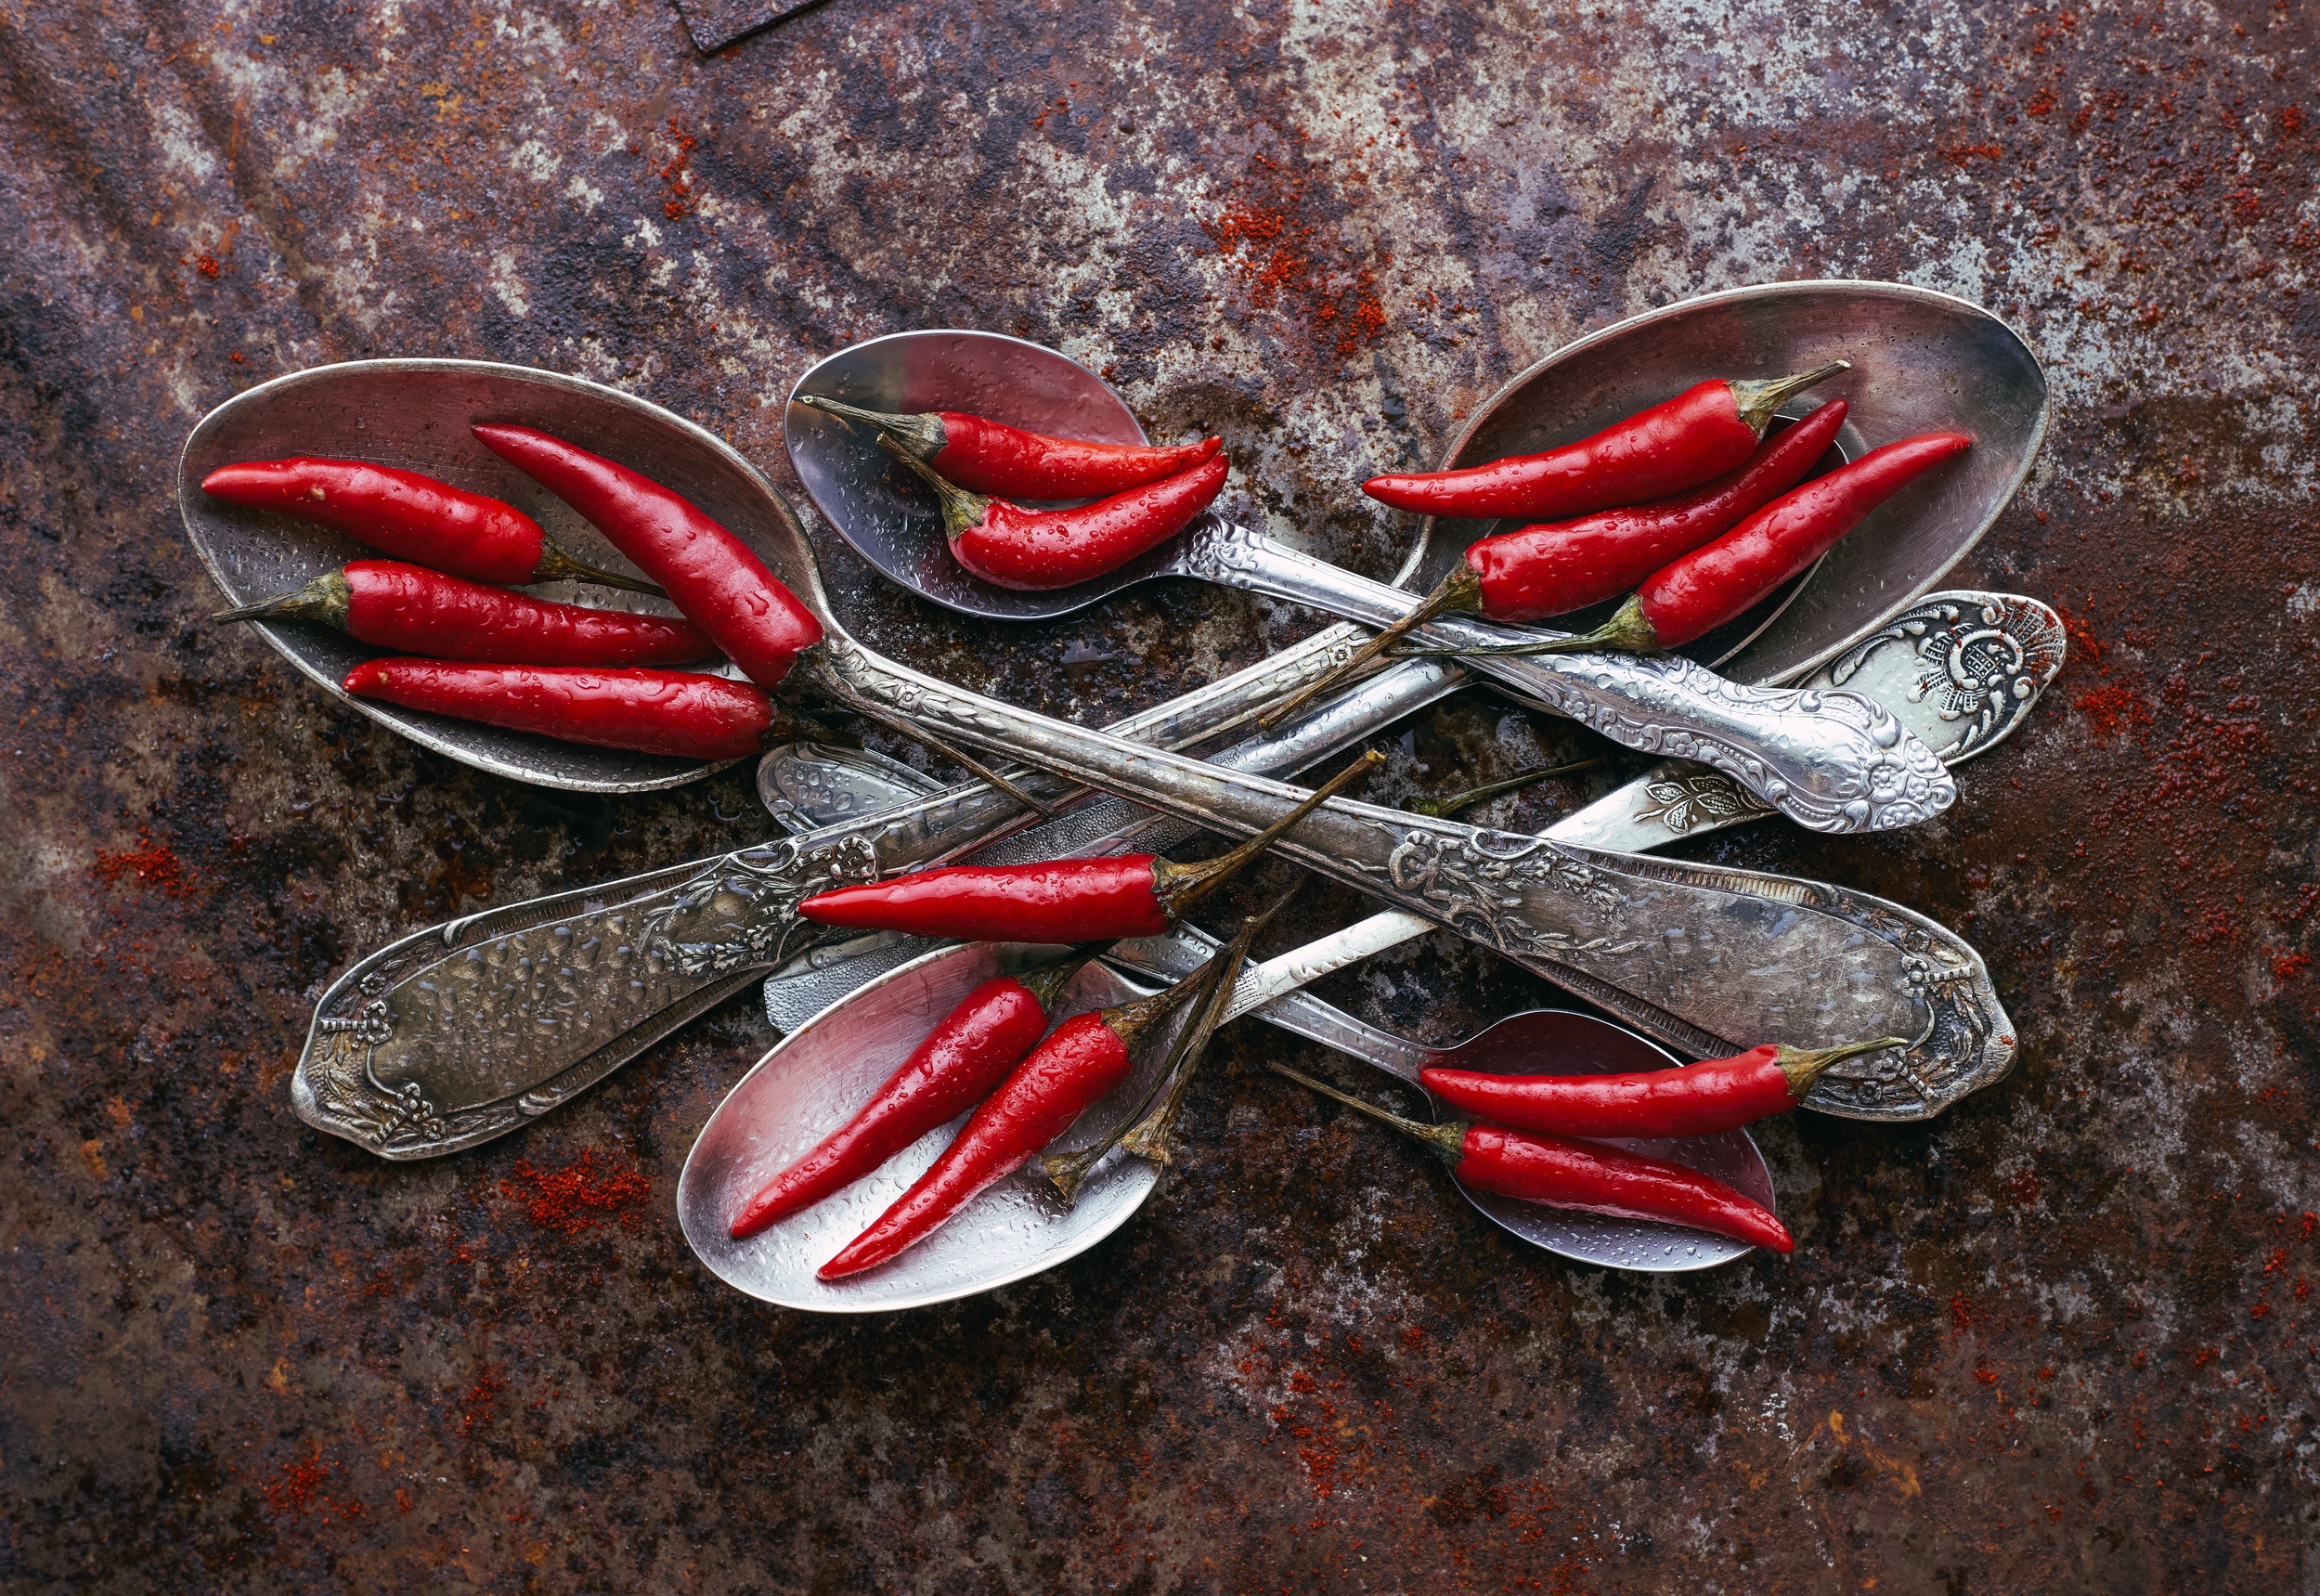 General 2499x1719 spoon food pepper vegetables chilli peppers closeup